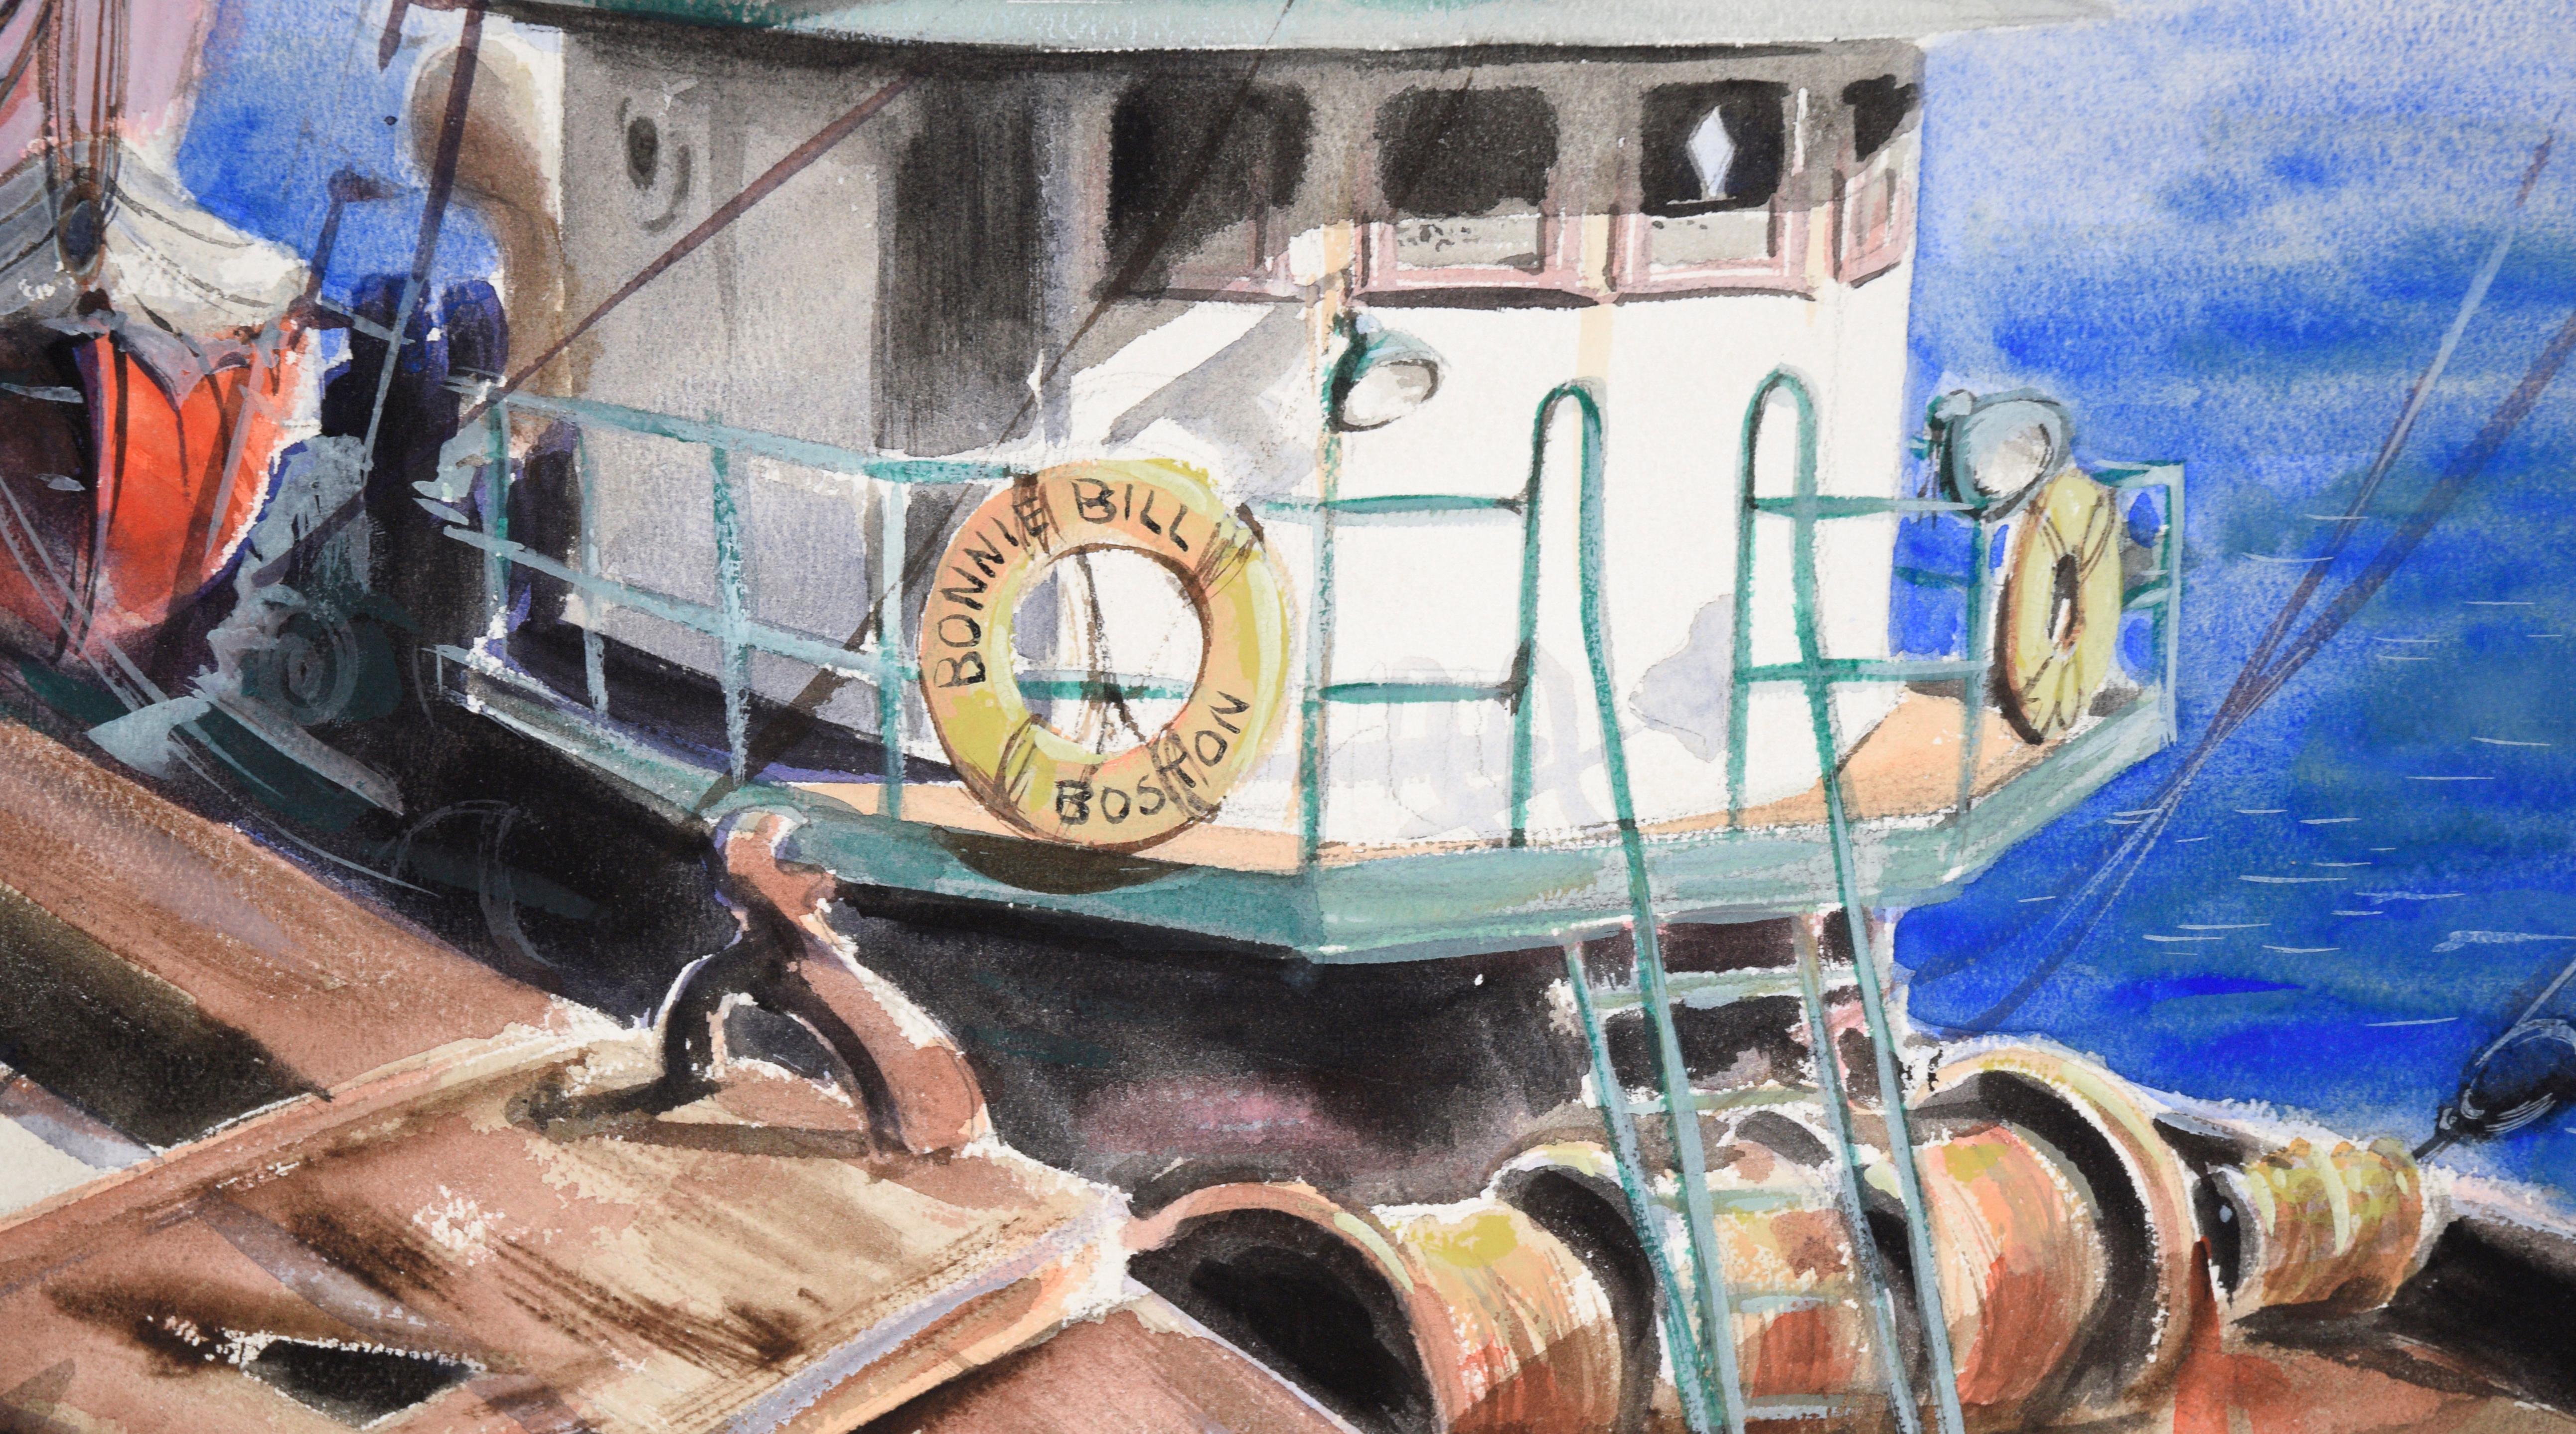 Bonnie Bill  - Tugboat at the Dock in Boston - Seascape in Watercolor on Paper  - Modern Art by Claire Weist